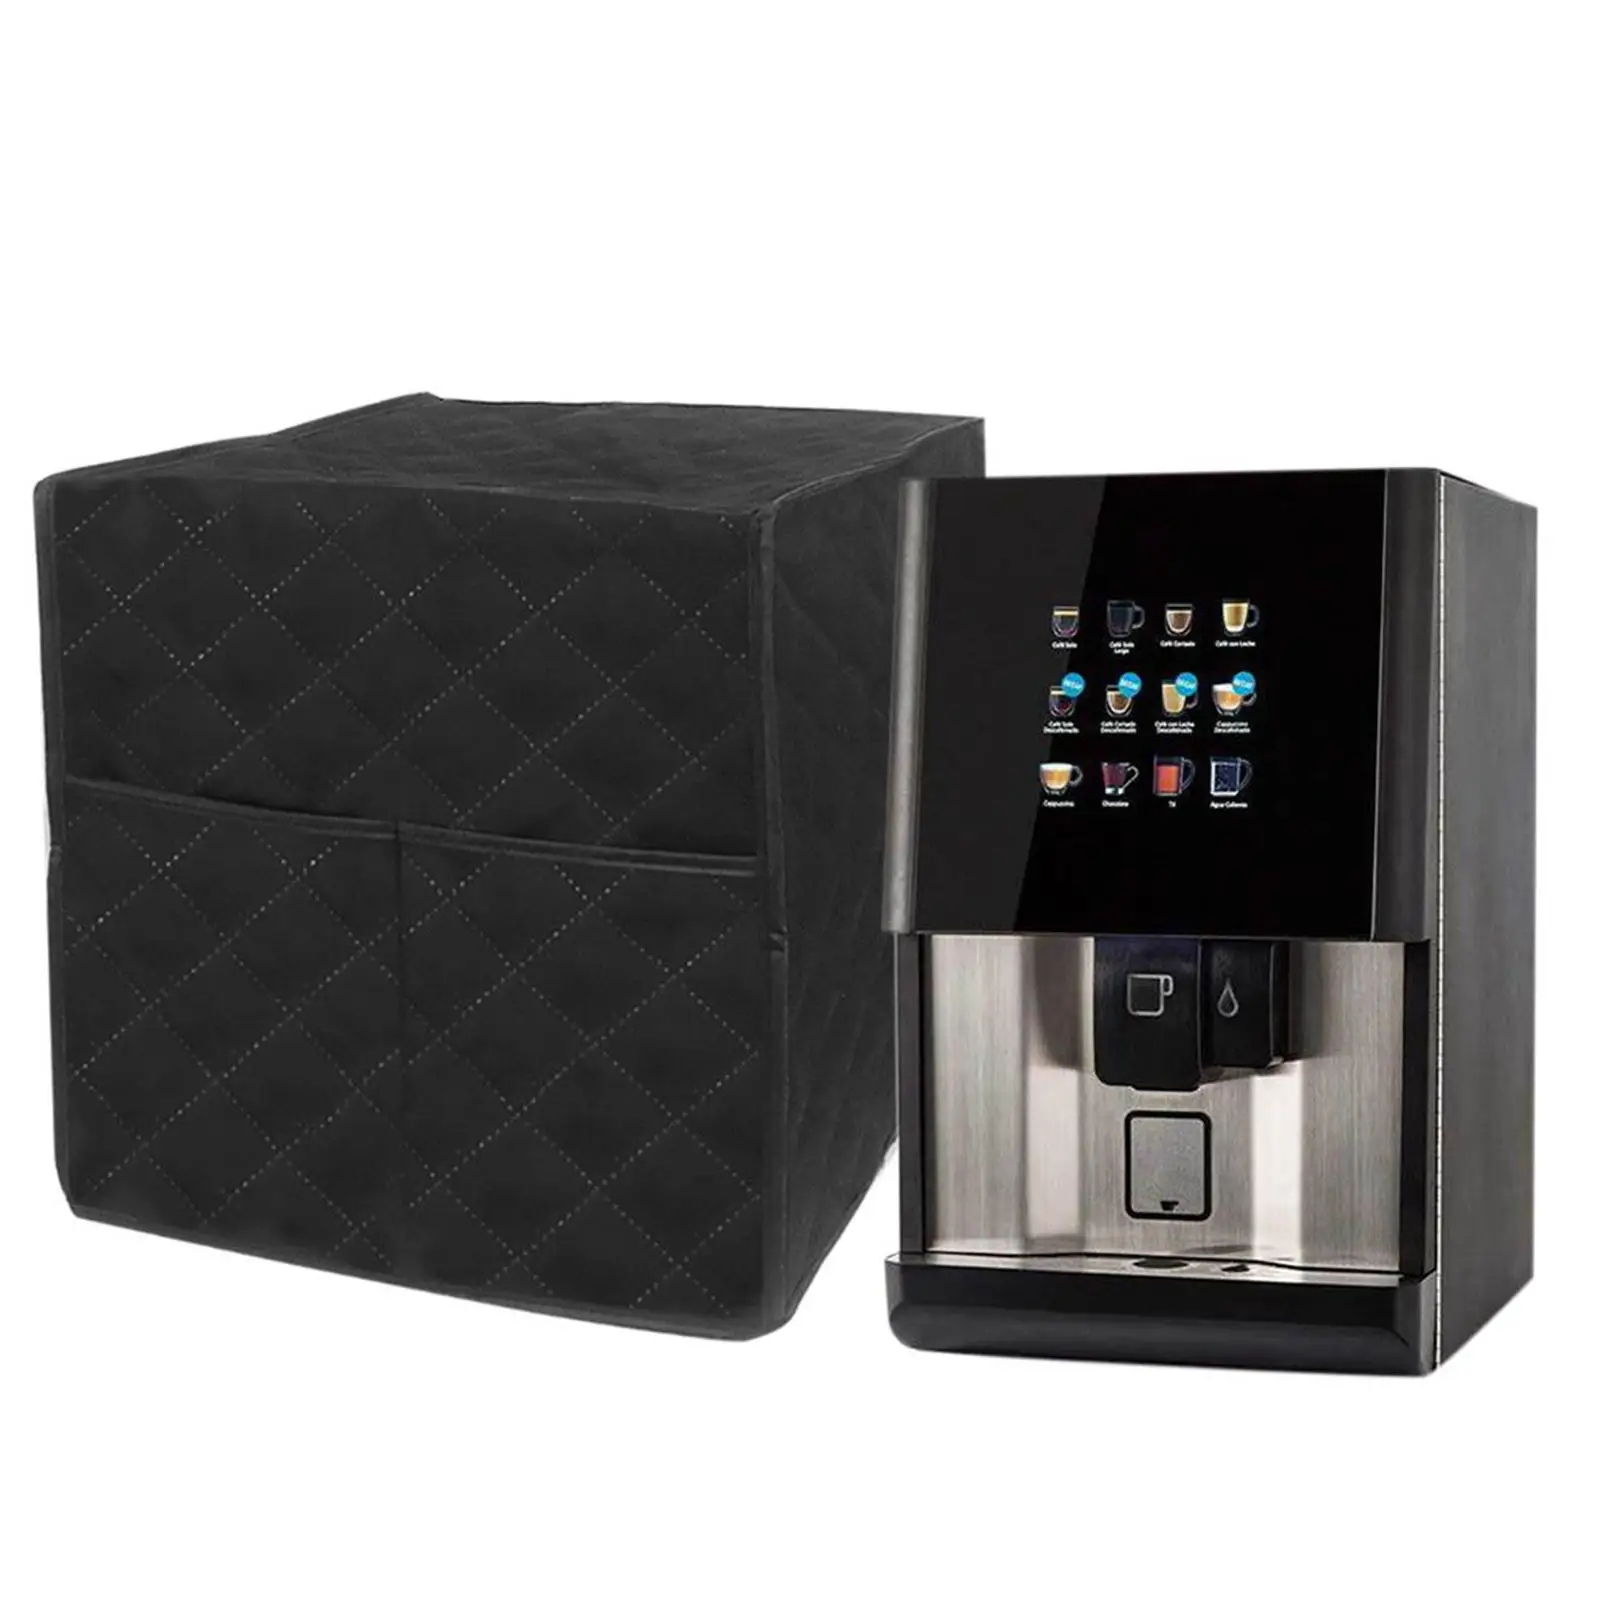 Espresso Machine Quilted Protective Cover Washable with Storage Pocket for Stand Mixer Stain Resistant Easily Install Accessory